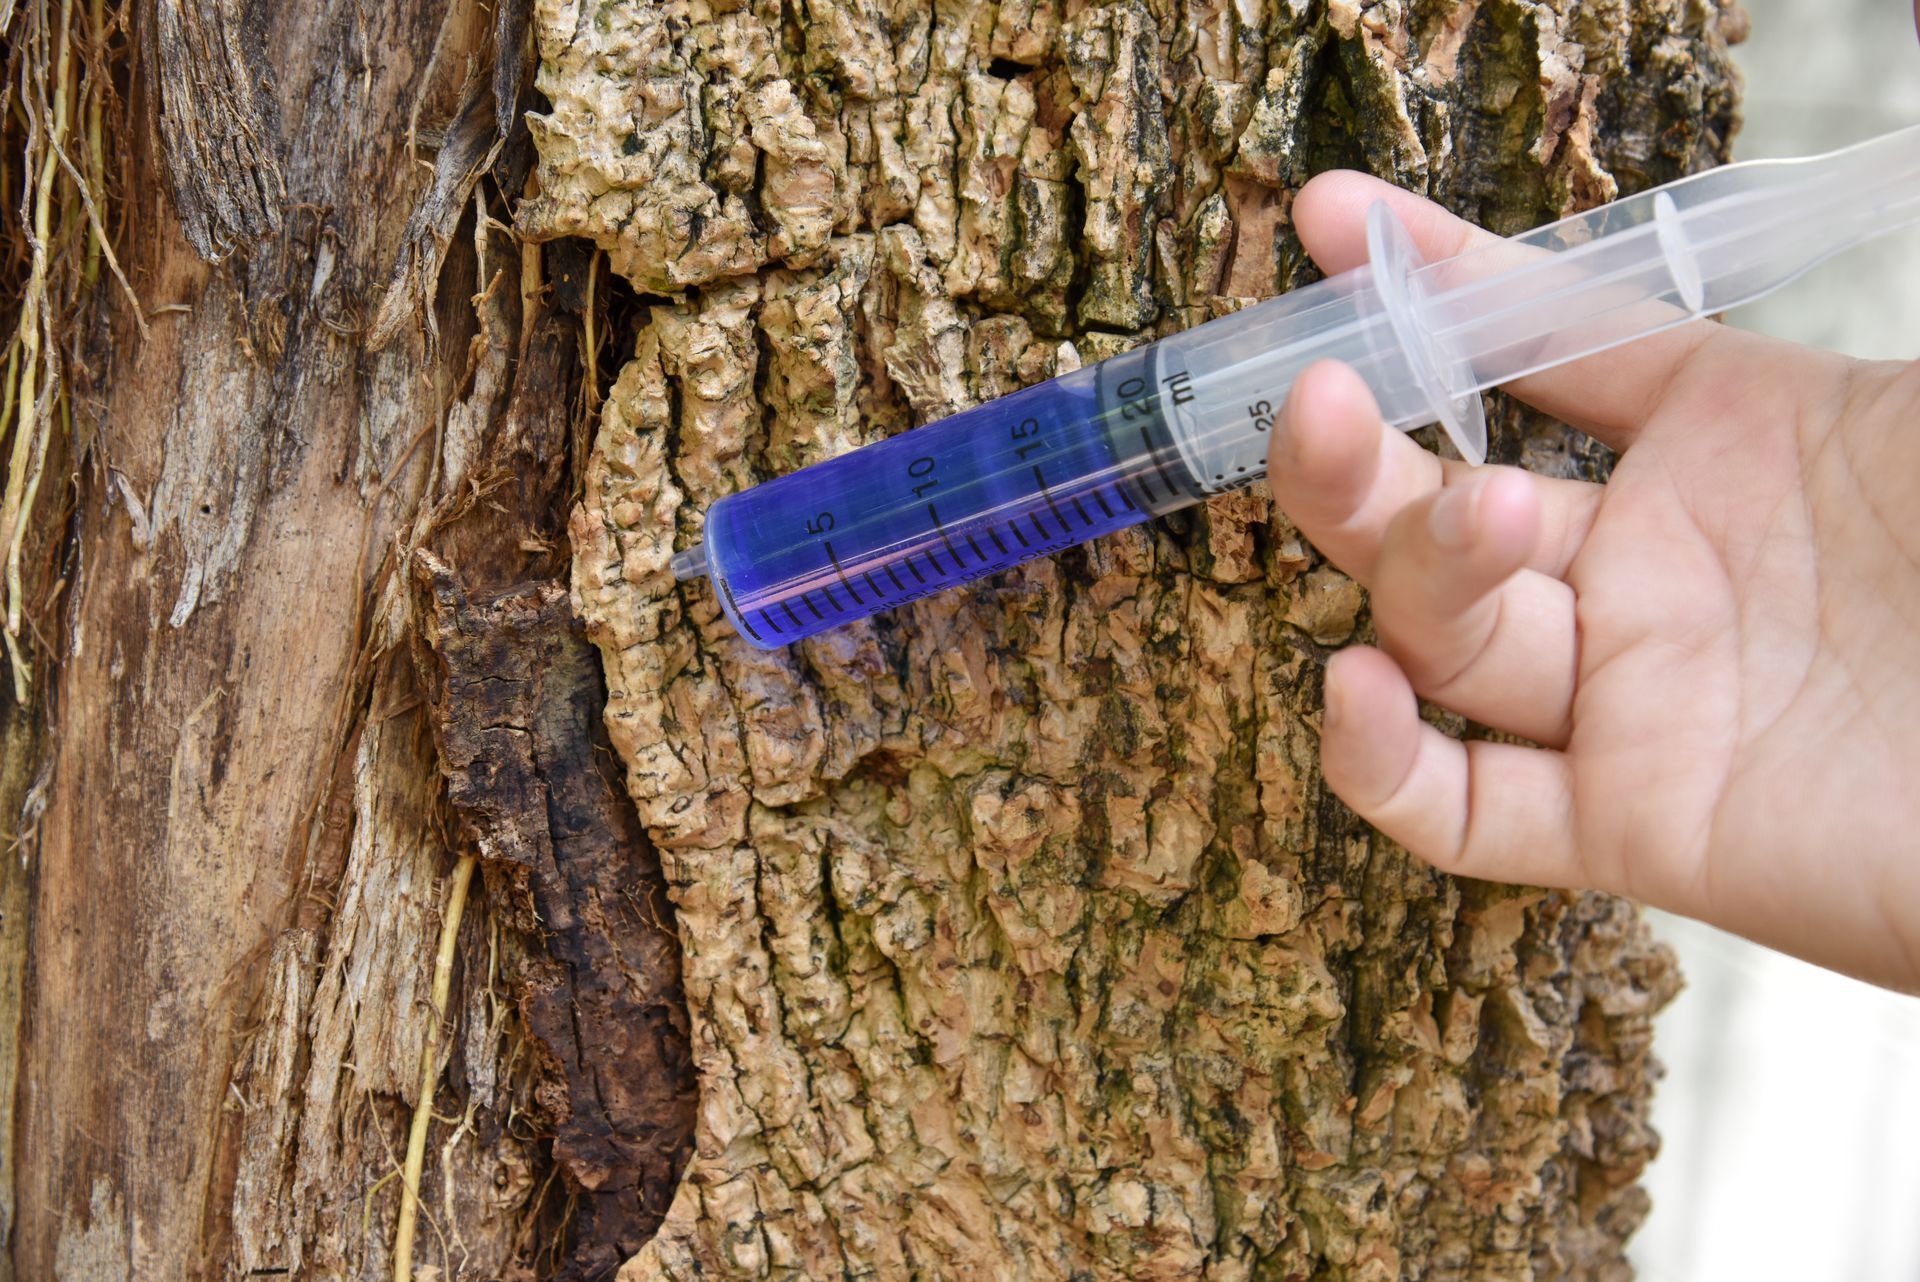 a hand with syringe blue medicine injection to the tree trunk skin is diseased